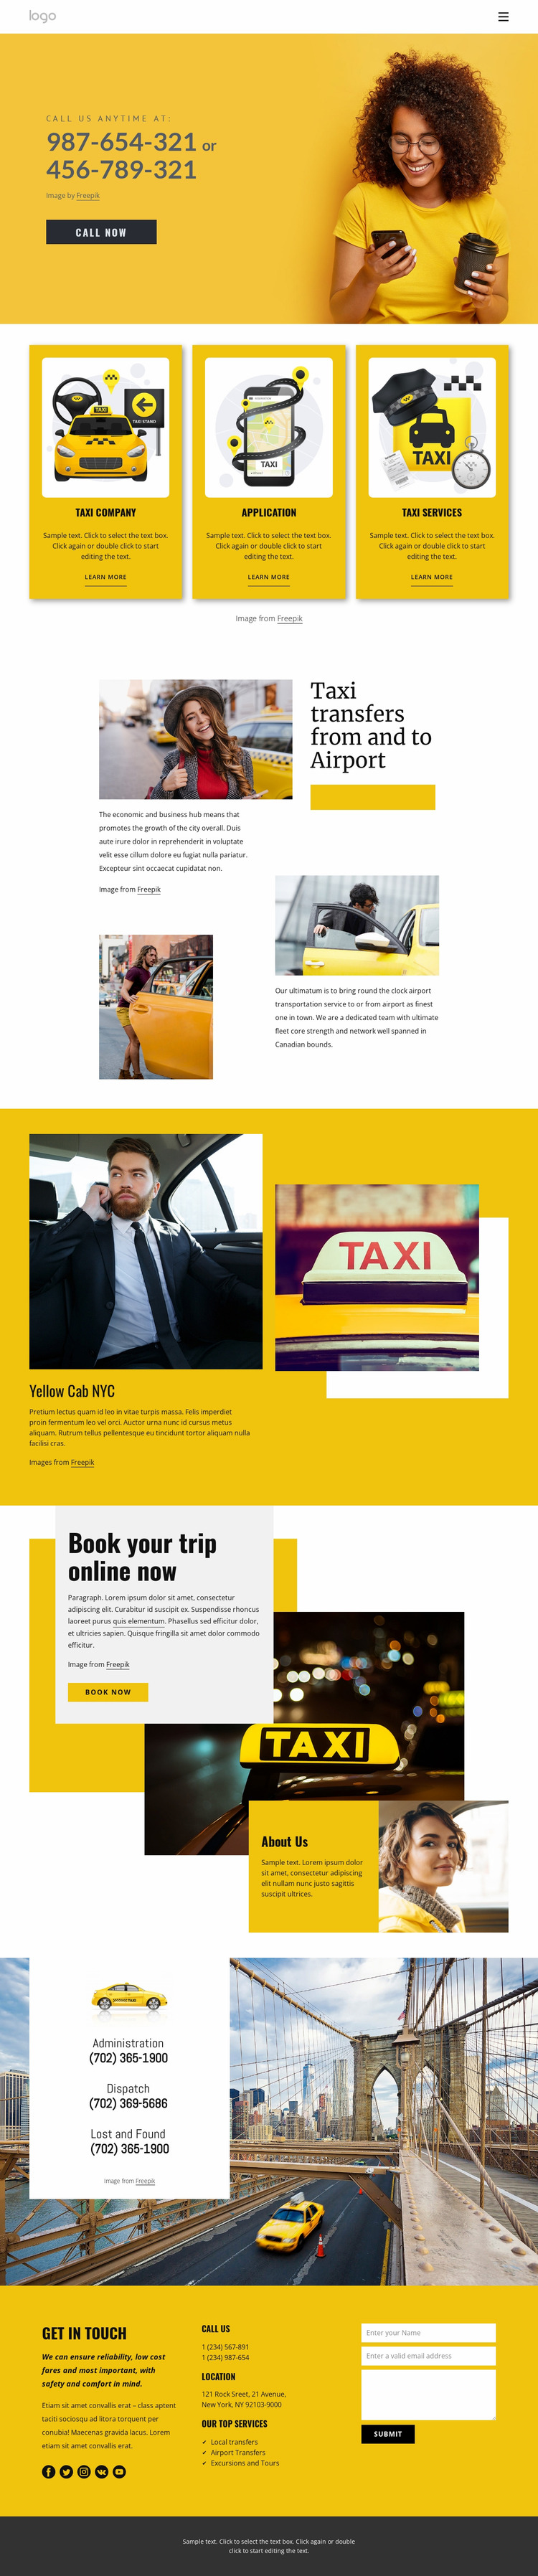 Quality taxi service Website Mockup